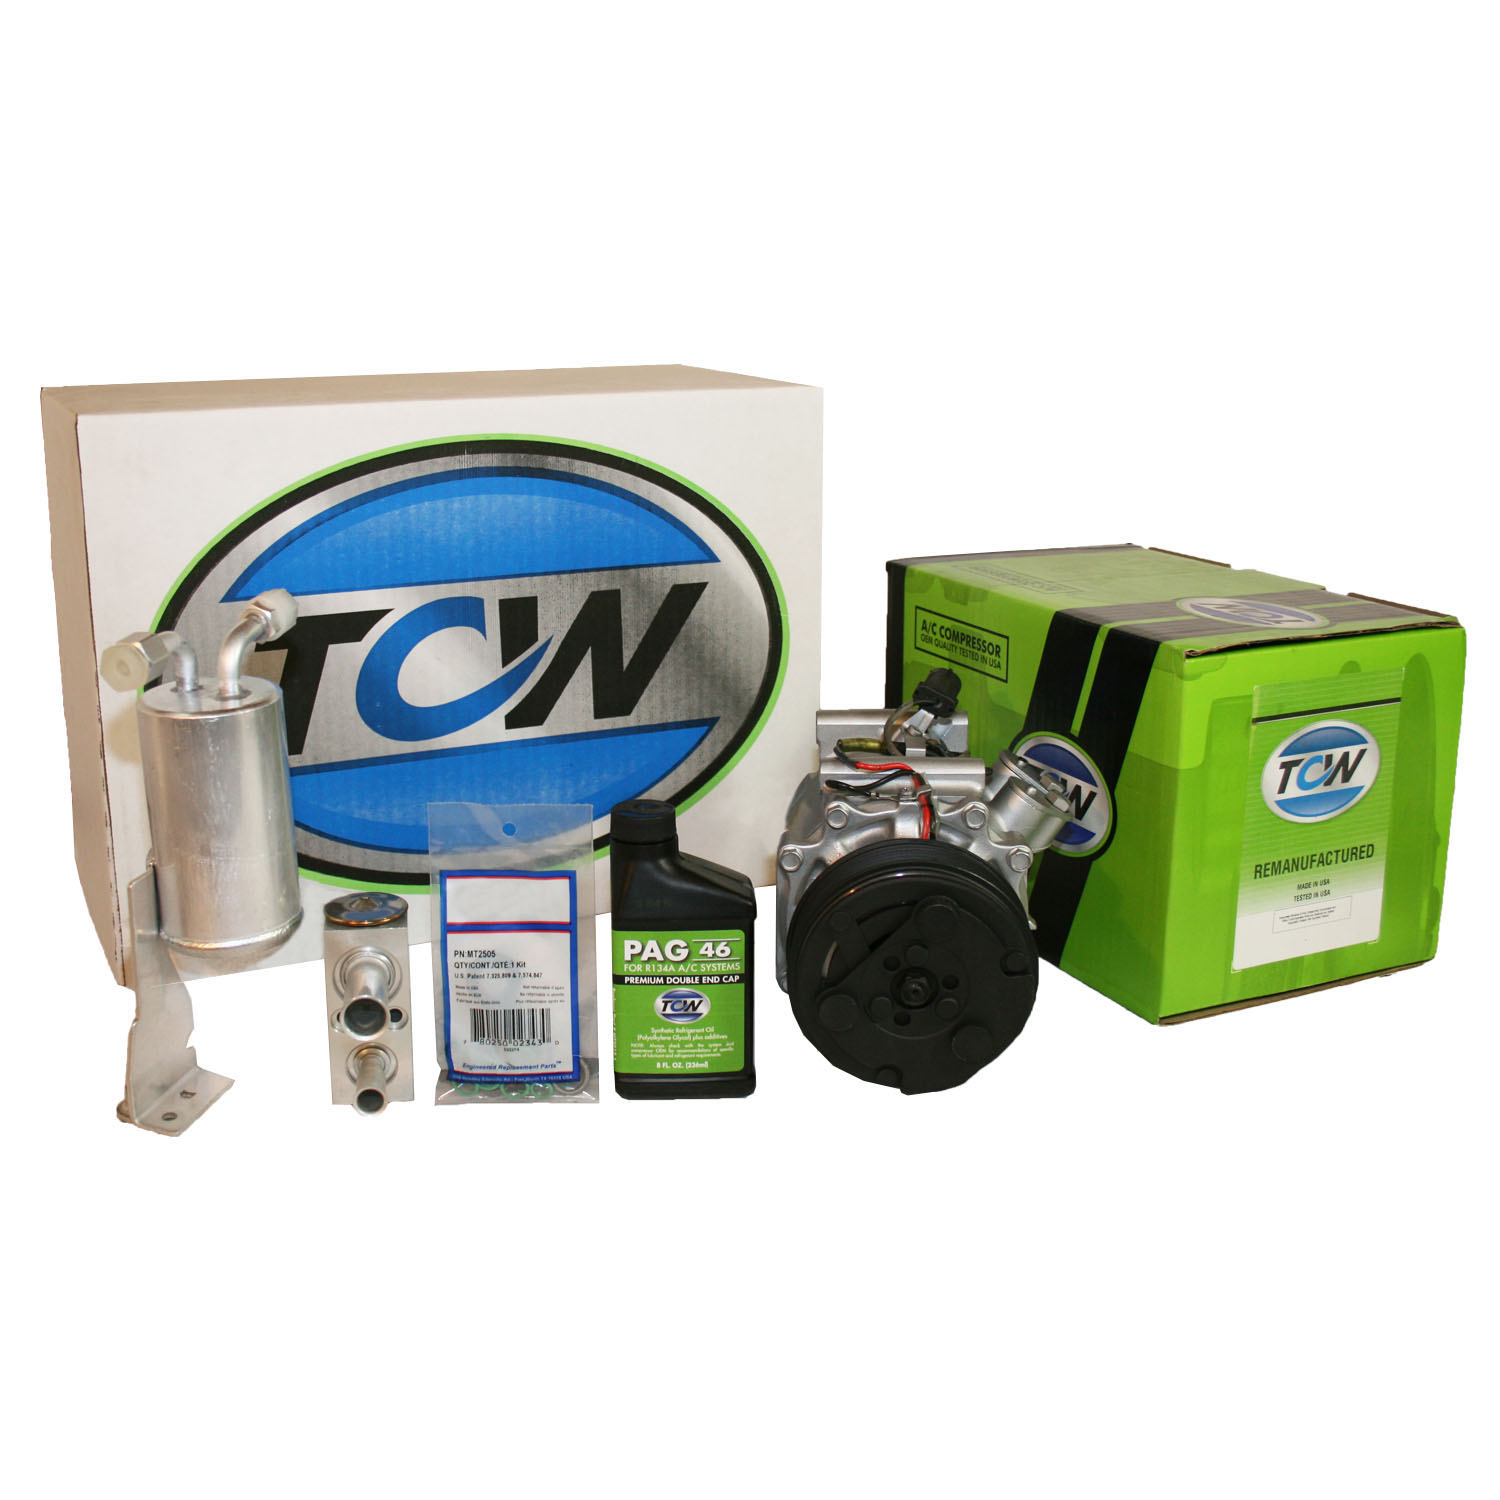 TCW Vehicle A/C Kit K1000464R Remanufactured